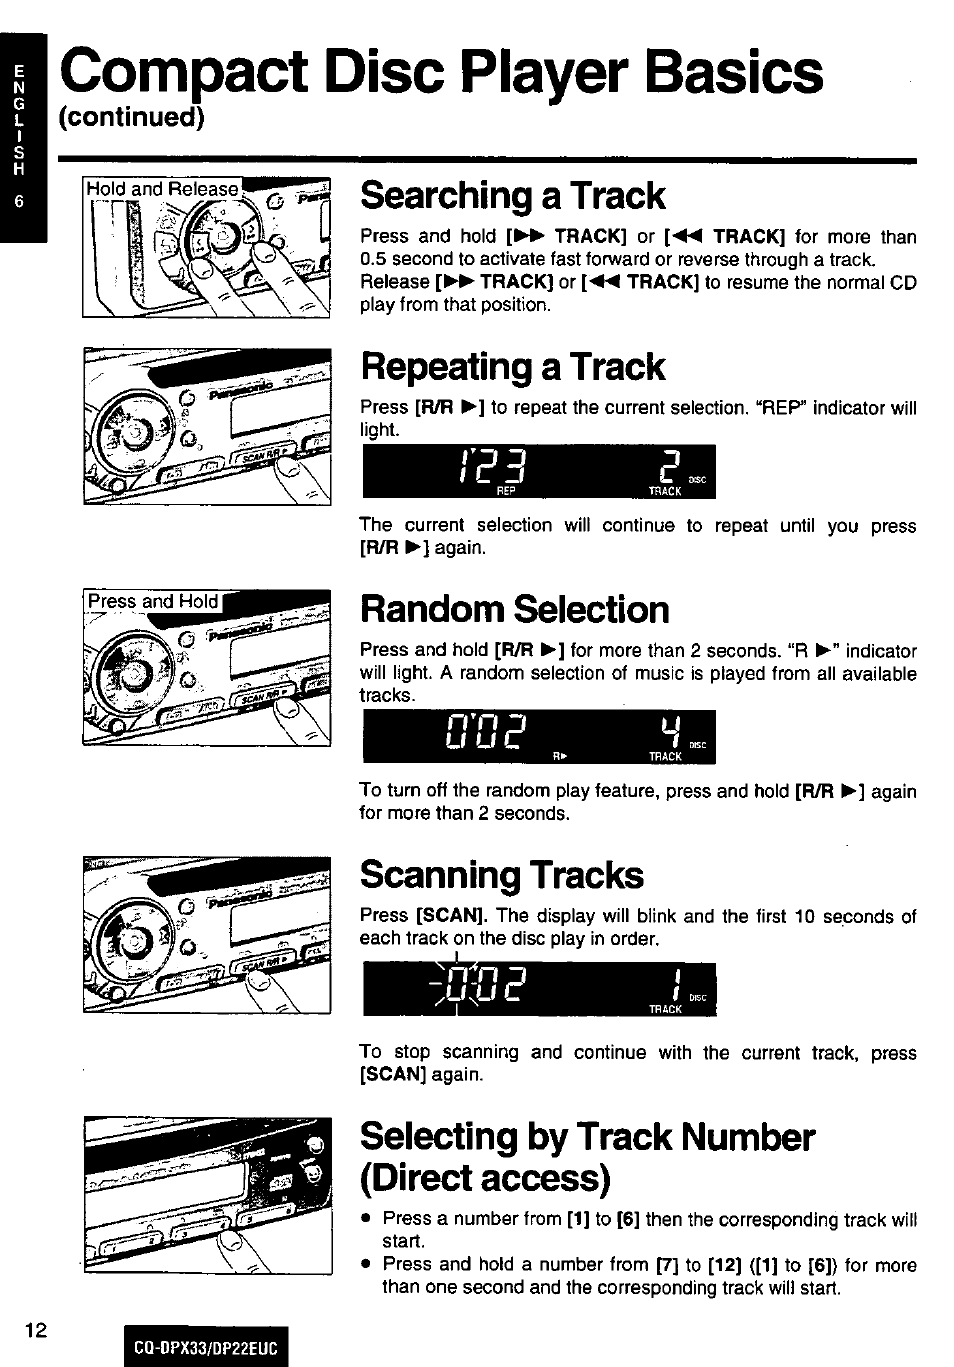 Compact disc player basics, Continued), Searching a track | Repeating a track, Random selection, Scanning tracks, Selecting by track number (direct access) | Panasonic CQ-DPX33 DP22EUC Manuel d'utilisation | Page 12 / 48